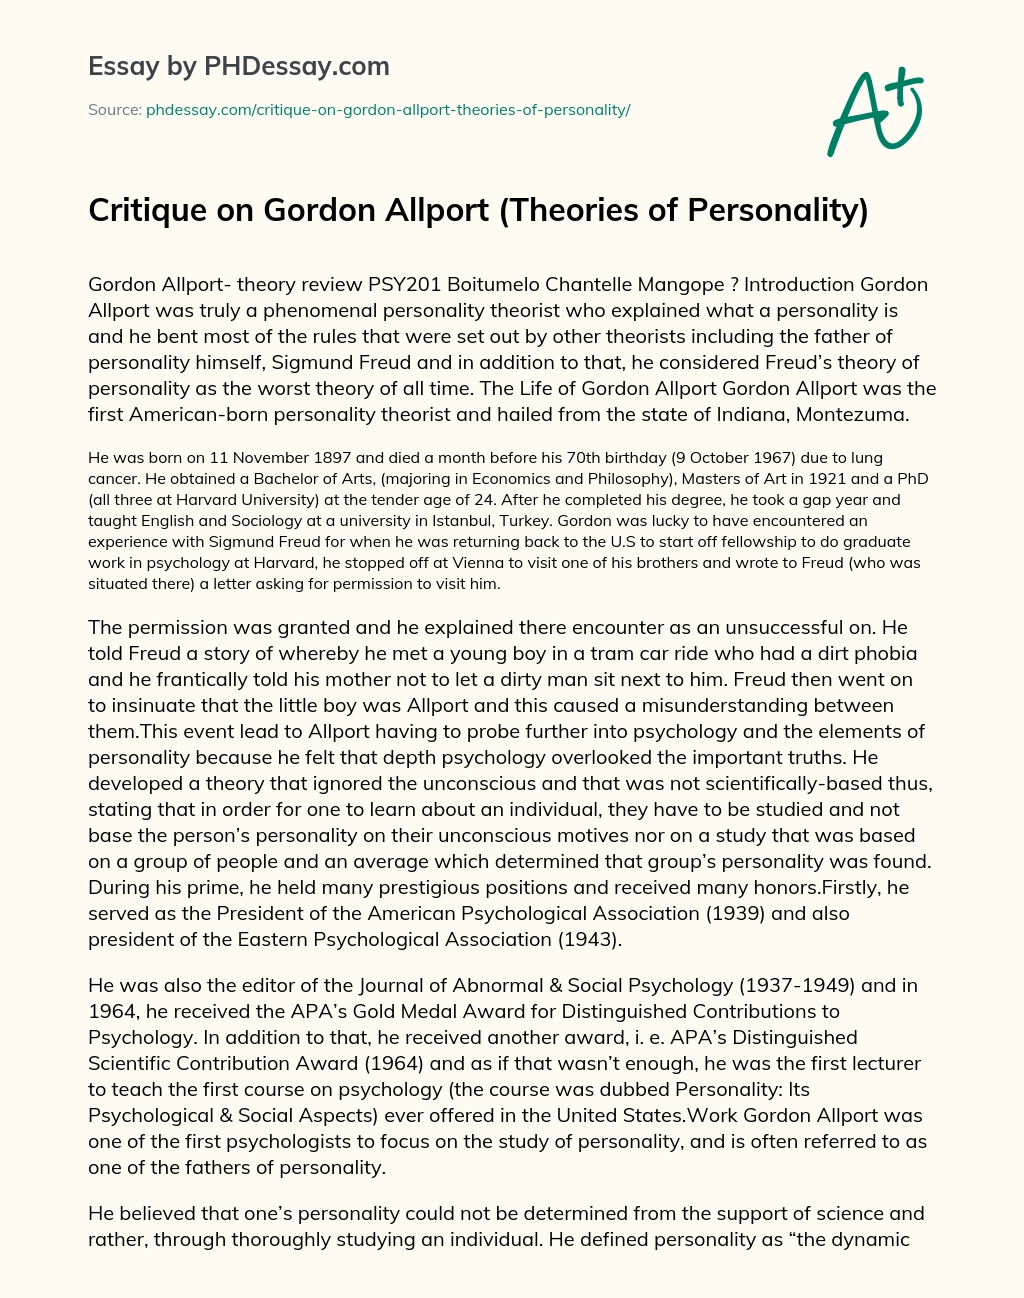 Critique on Gordon Allport (Theories of Personality) essay